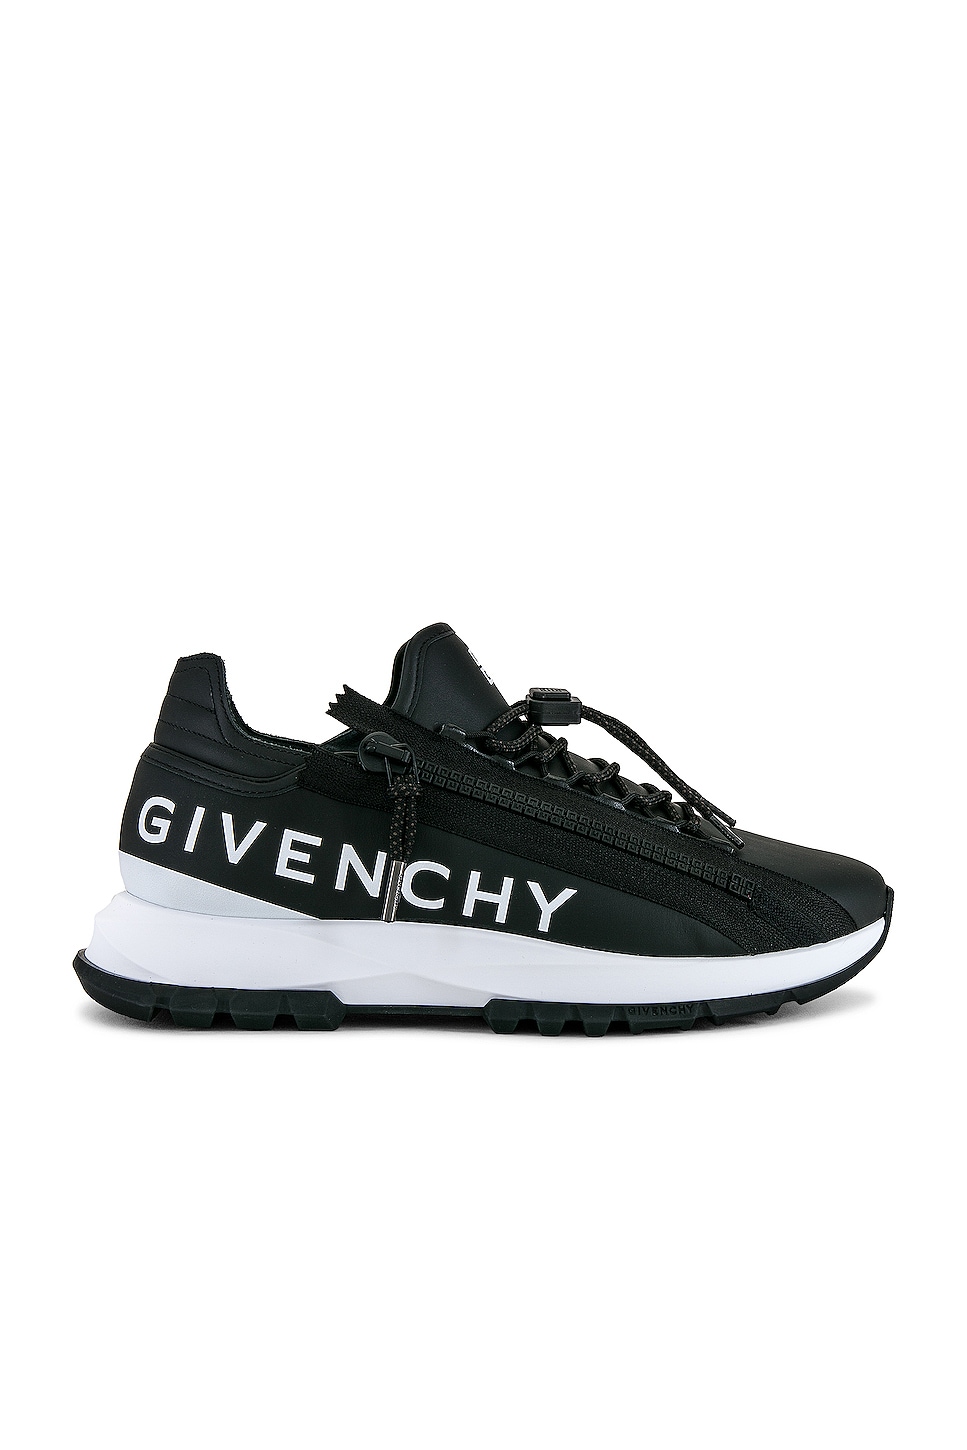 Image 1 of Givenchy Spectre Zip Runners Sneaker in Black & White